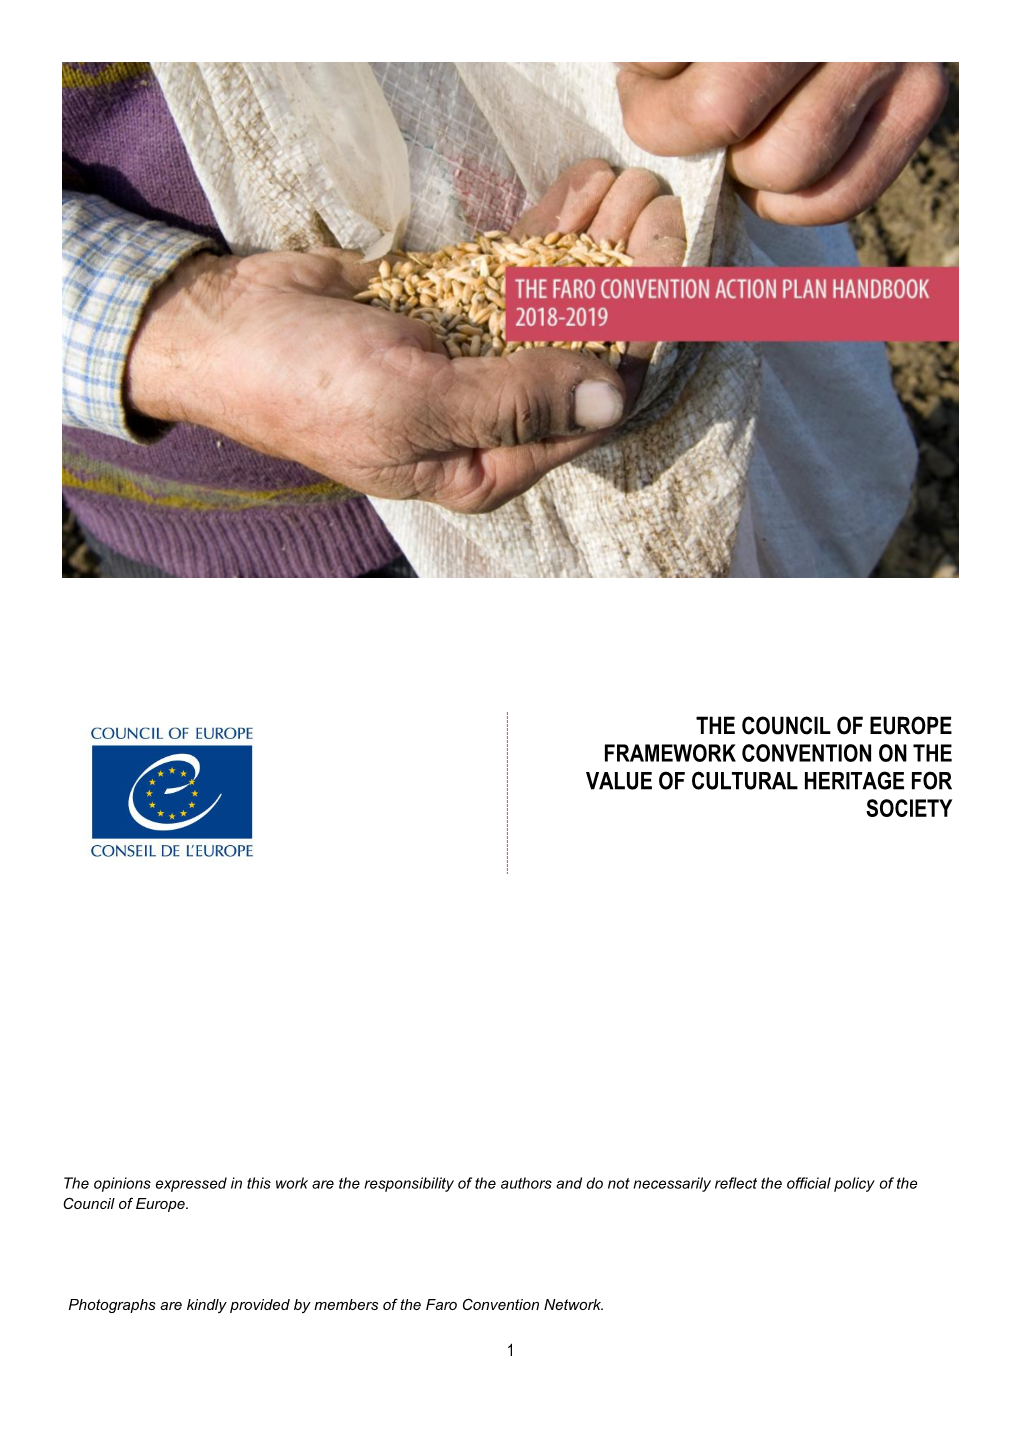 The Council of Europe Framework Convention on the Value of Cultural Heritage for Society